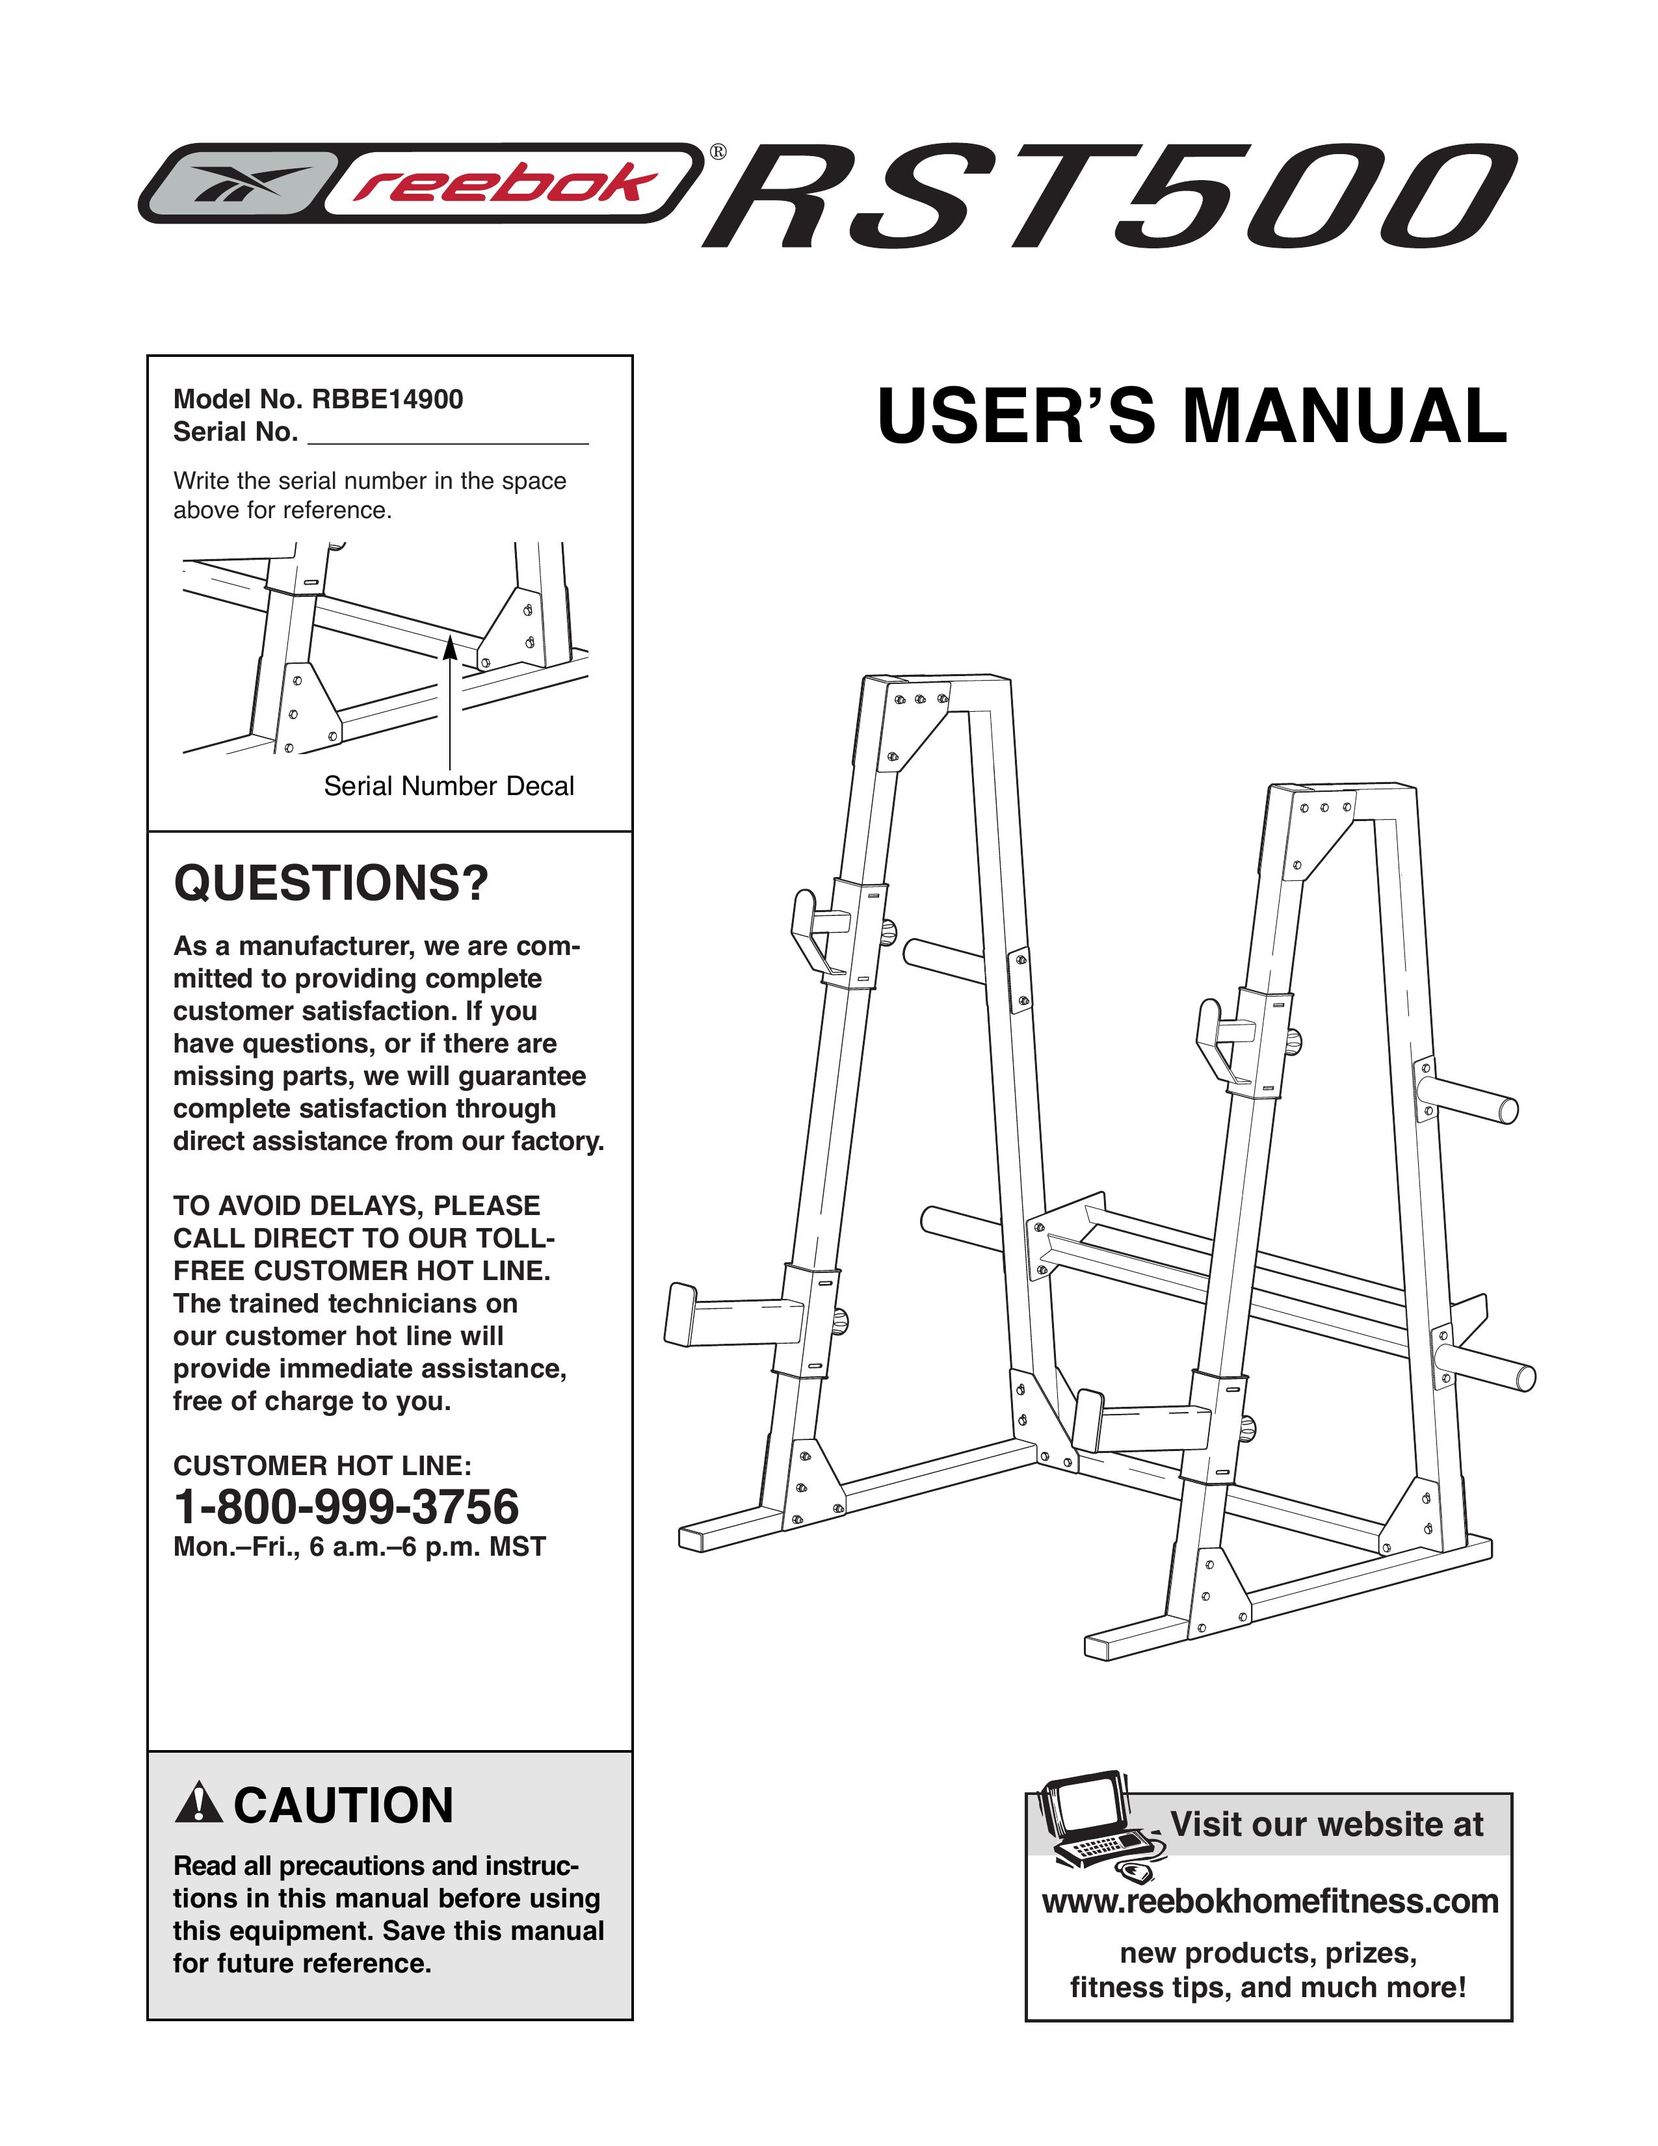 Reebok Fitness RBBE14900 Home Gym User Manual